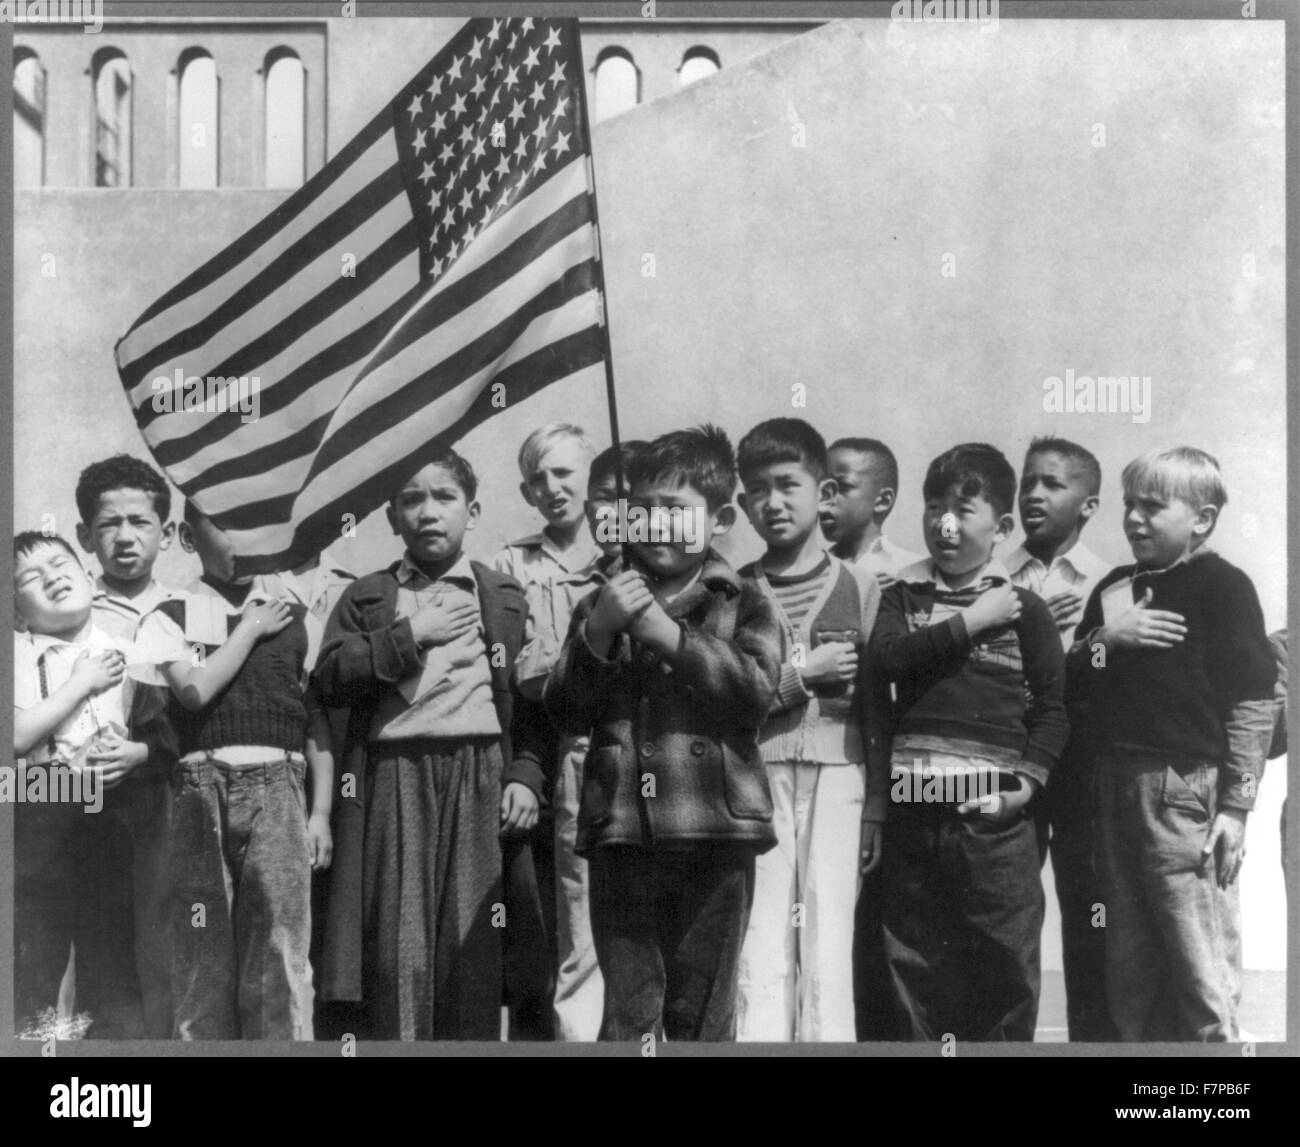 Photographic print - San Francisco, California, April 1942. Children at the Weill public school for the so-called international settlement and including many Japanese-Americans, saluting the flag. They include evacuees of Japanese descent who will be housed in War relocation authority centres for the duration. Stock Photo